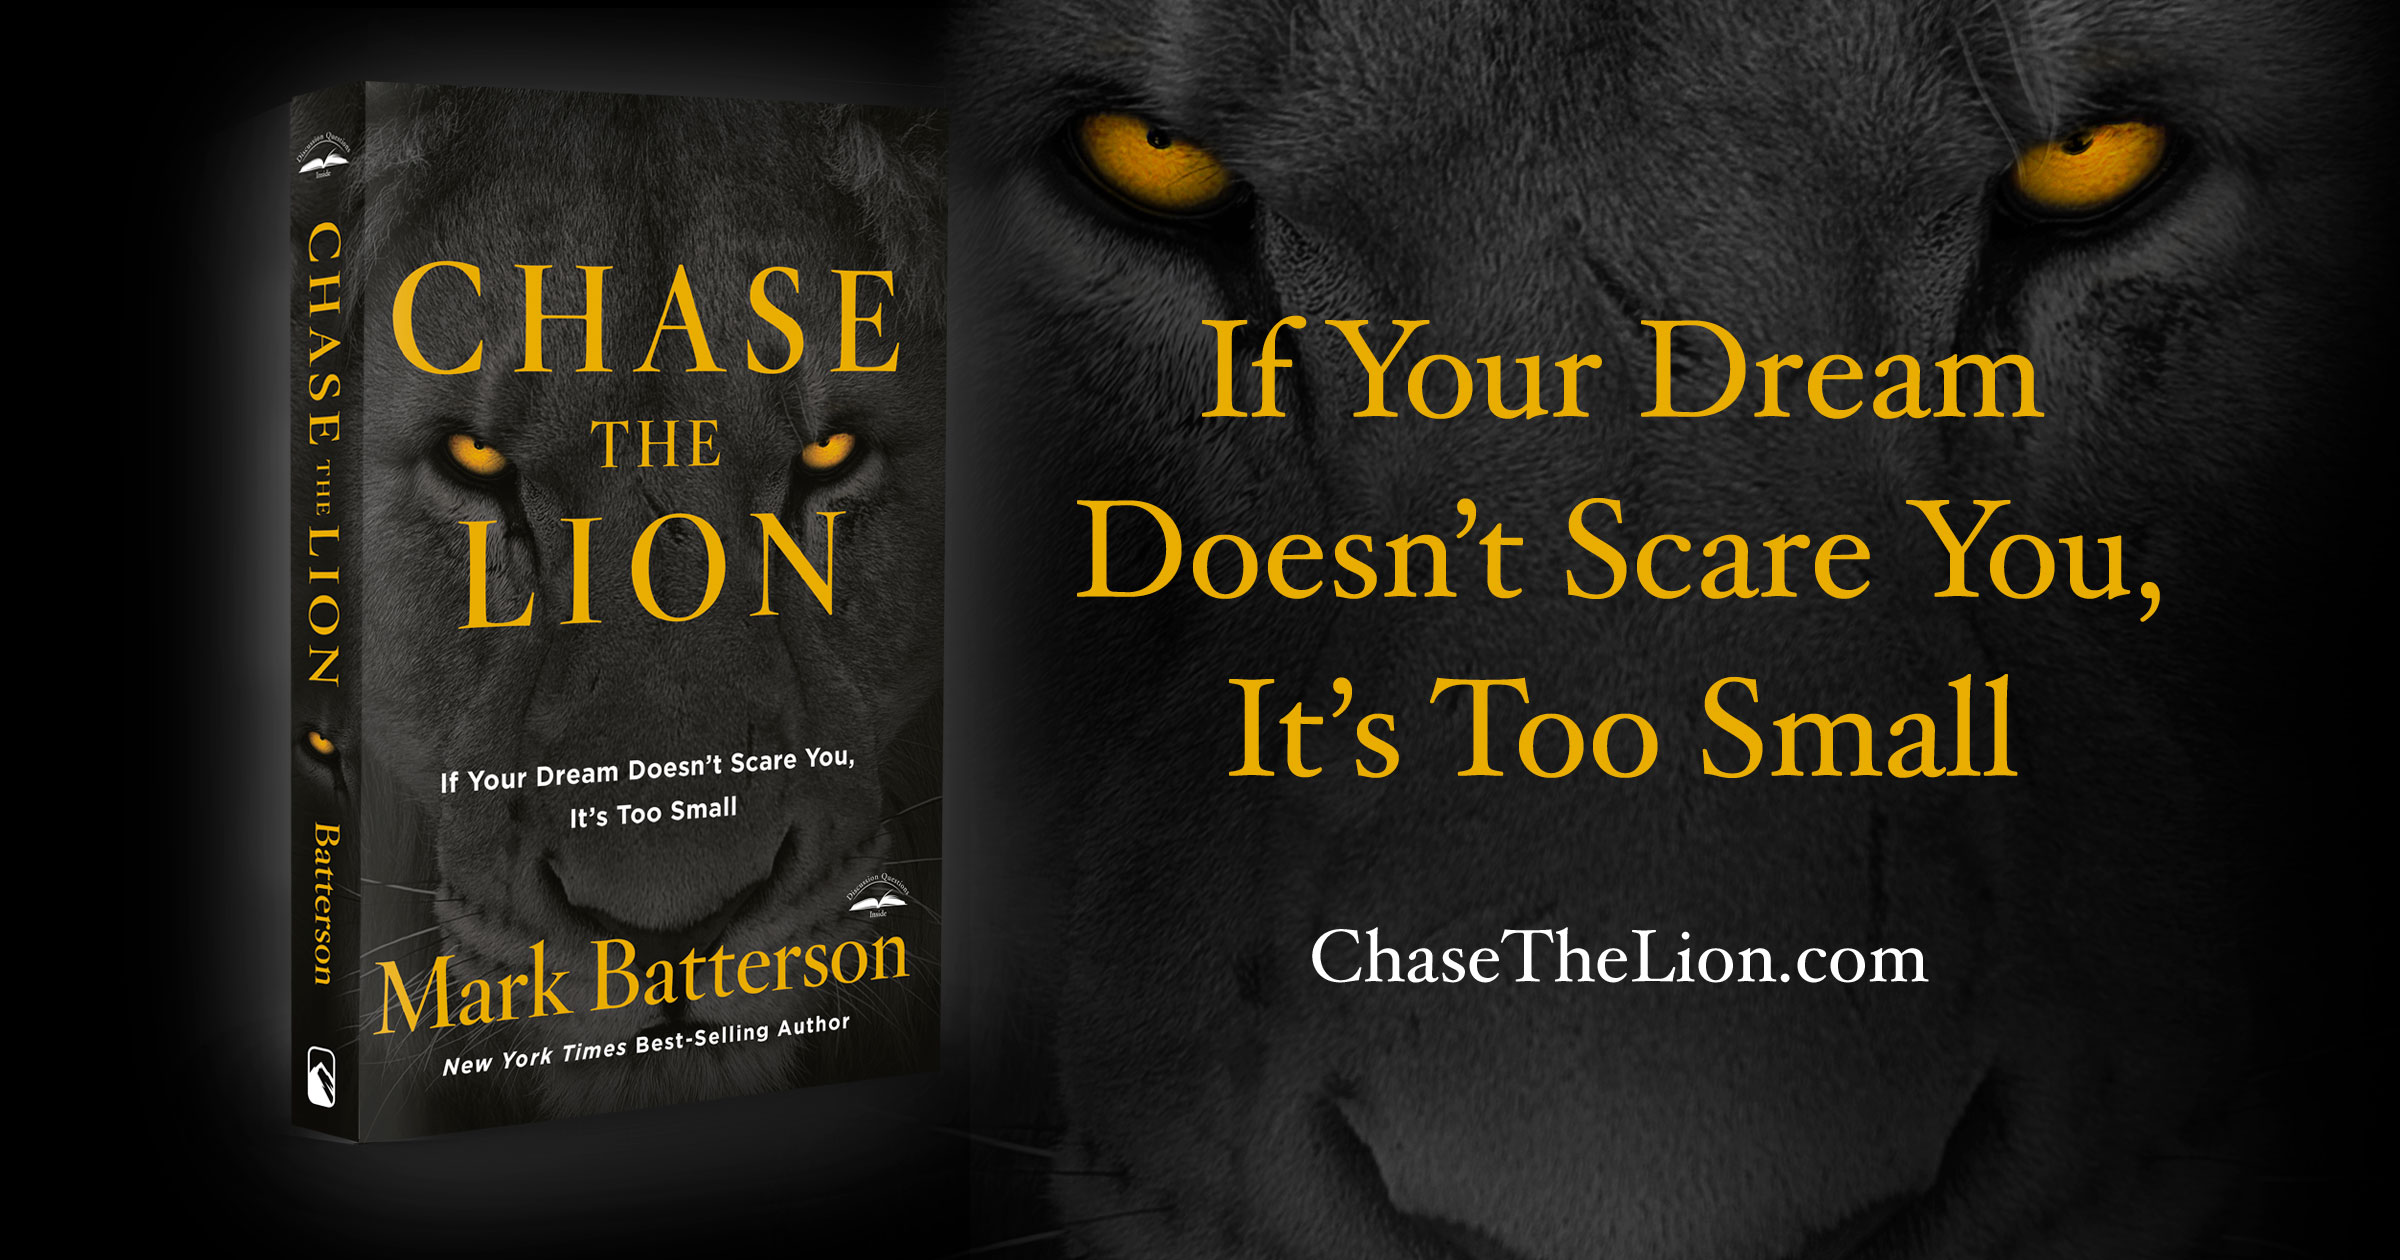 Chase the Lion by Mark Batterson